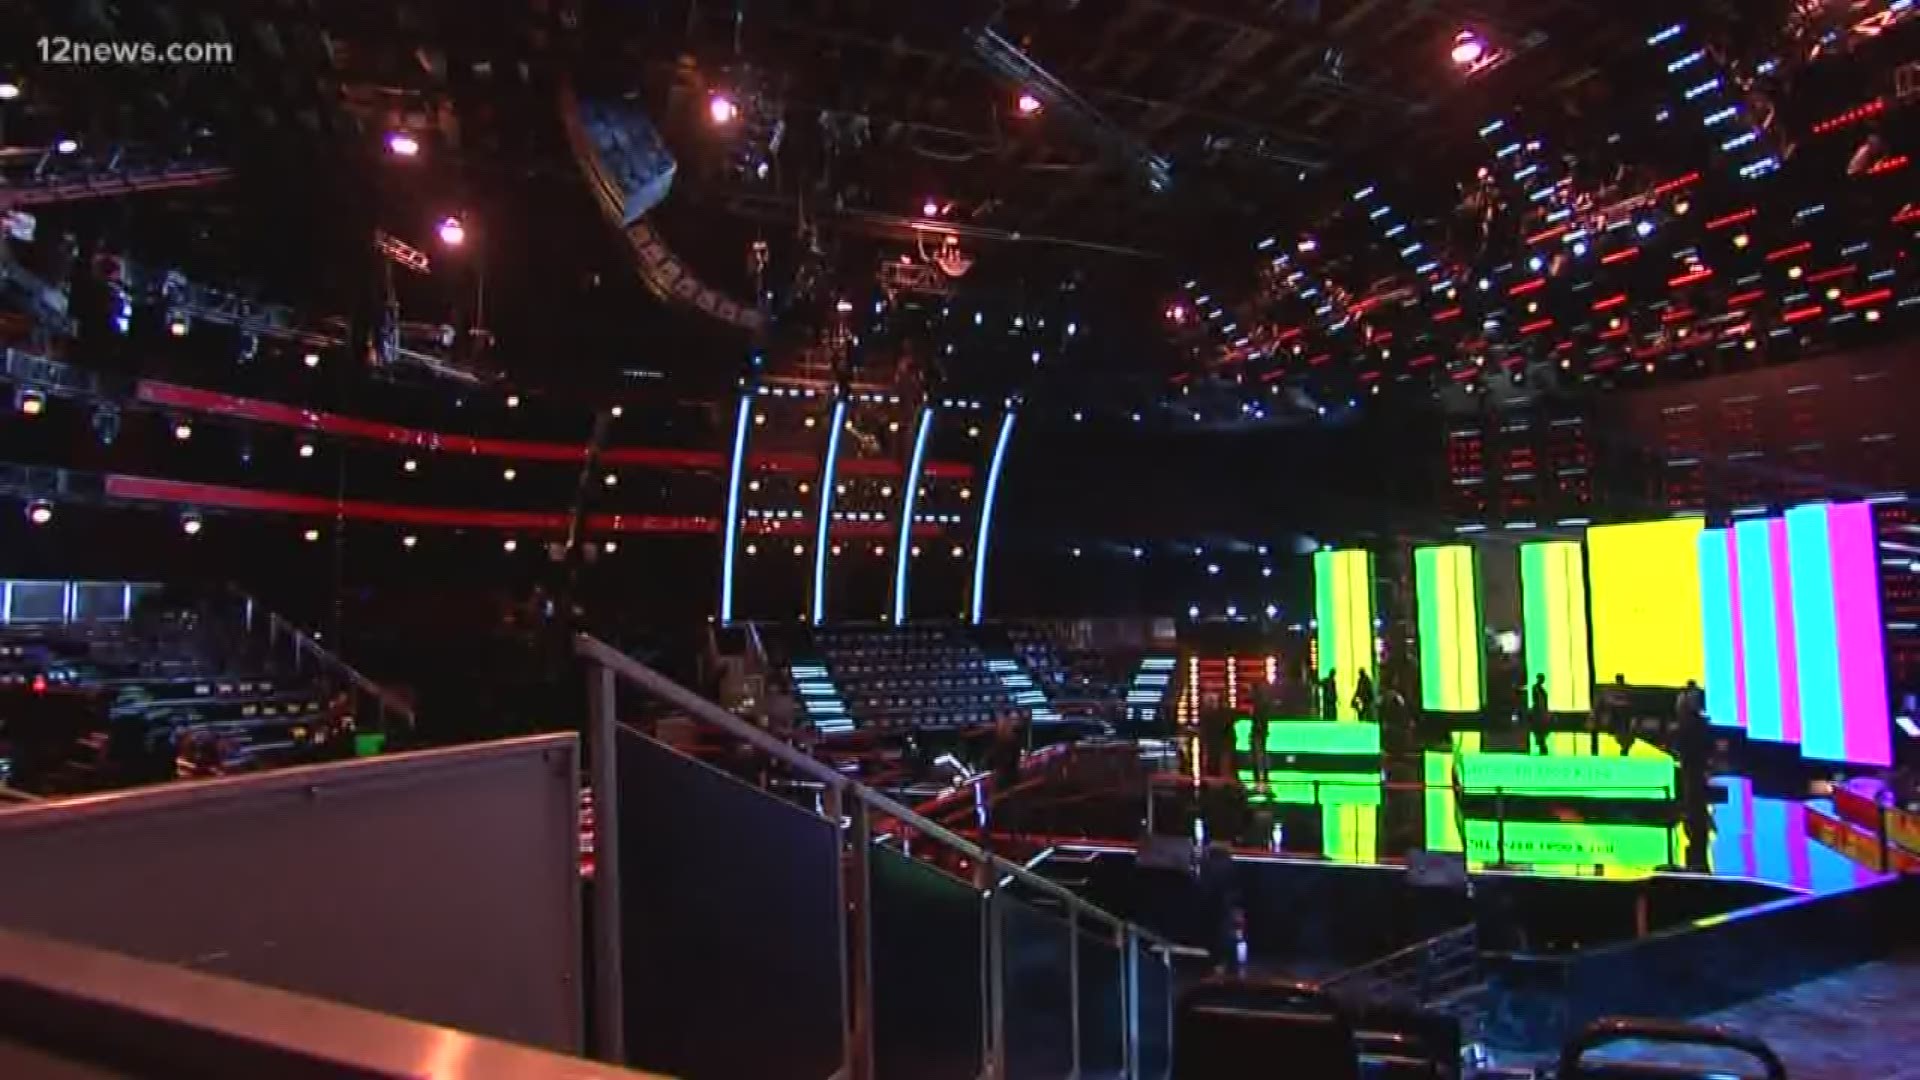 'The Voice' stage is one of the largest at Universal Studios and the world. We take you behind the scenes of 'The Voice' to show you what goes into making the show sing.